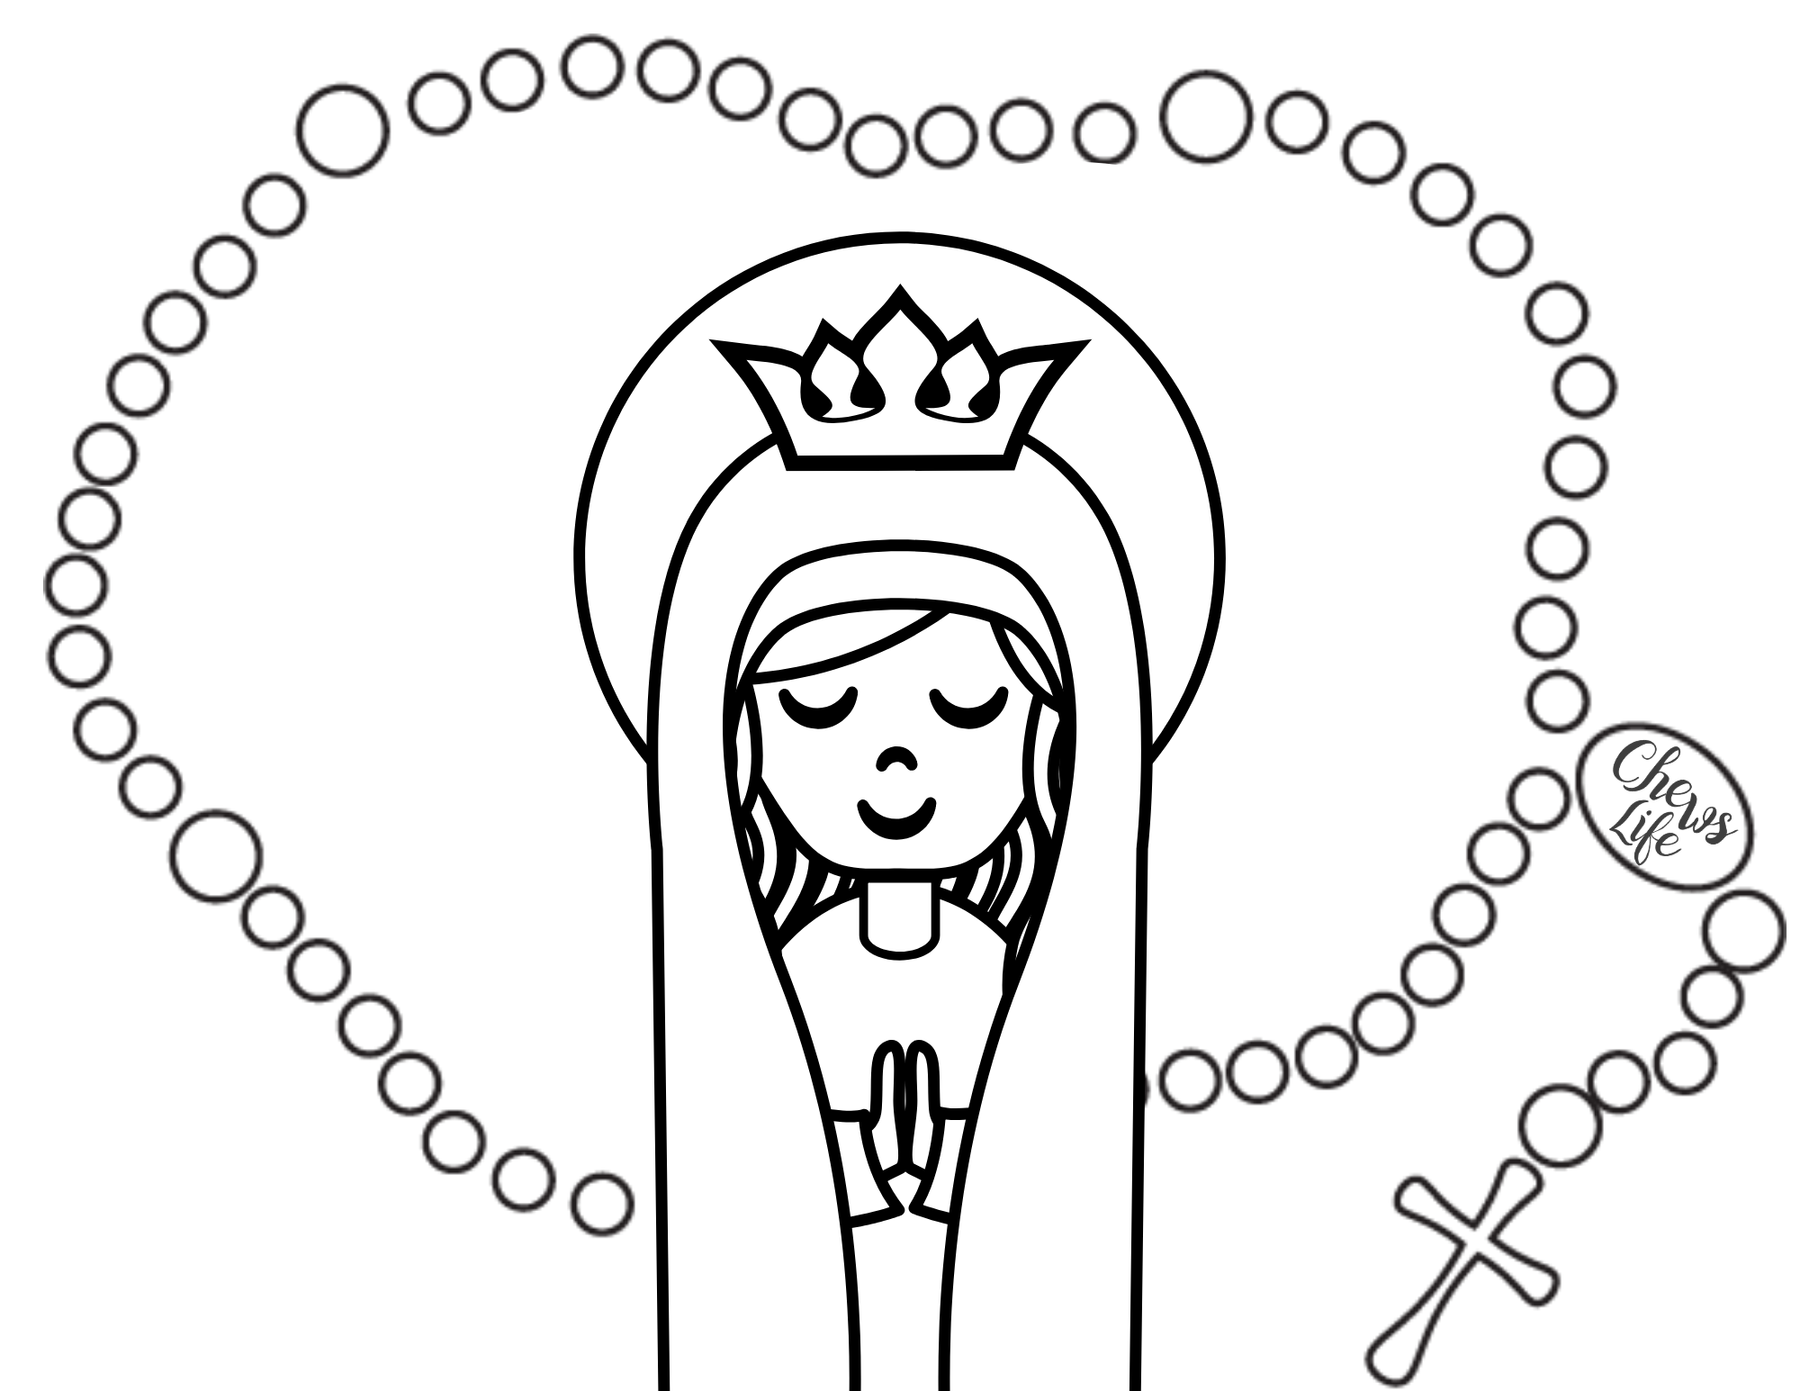 Spiritual Work of Mercy Postcard | Comfort the Sorrowful | Coloring page